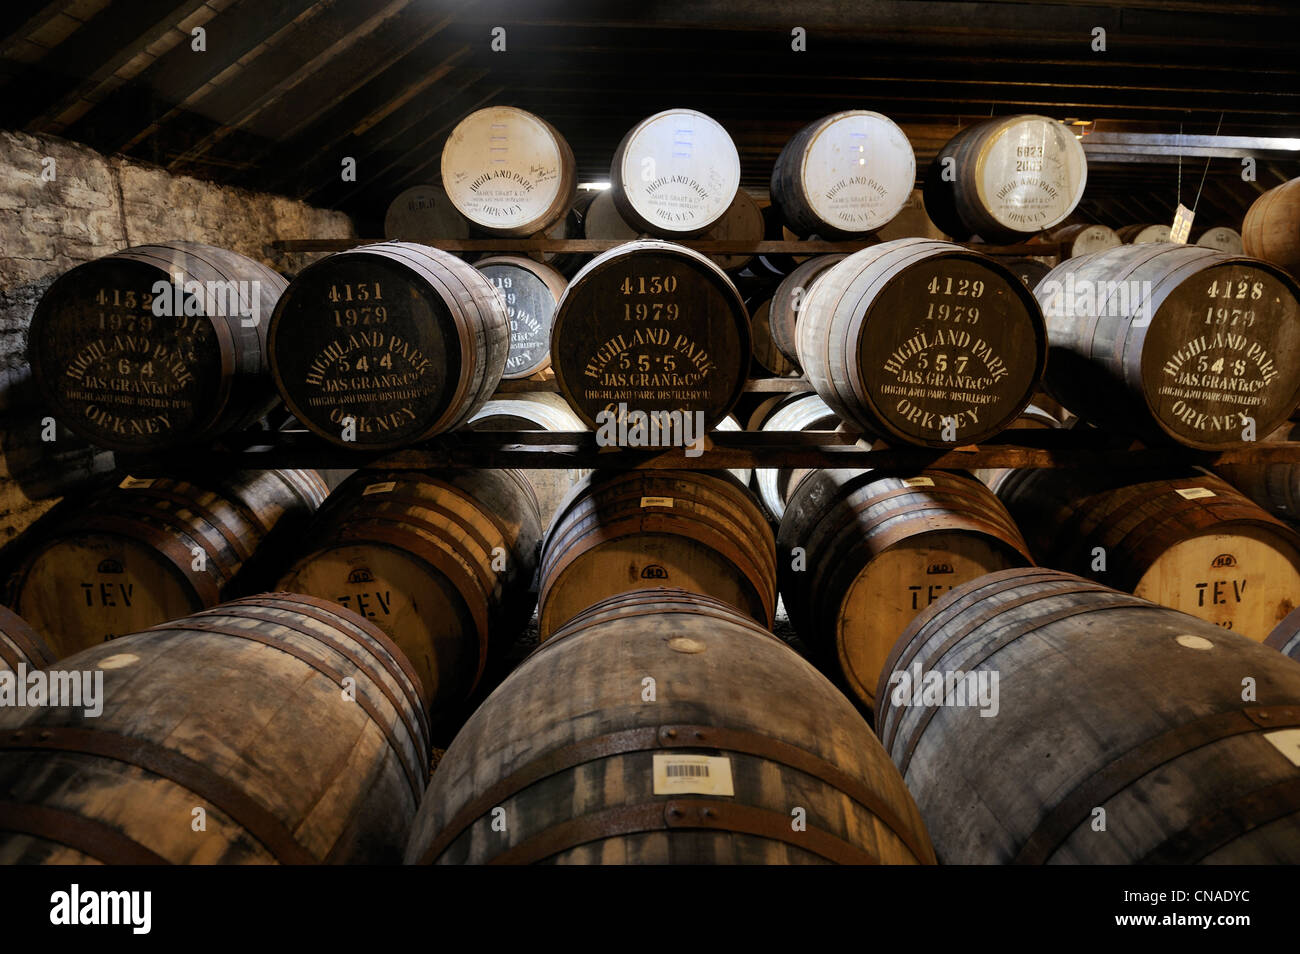 United Kingdom, Scotland, Orkney Islands, Kirkwall, Highland Park whisky distillery, storage of the barrels for the maturing of Stock Photo